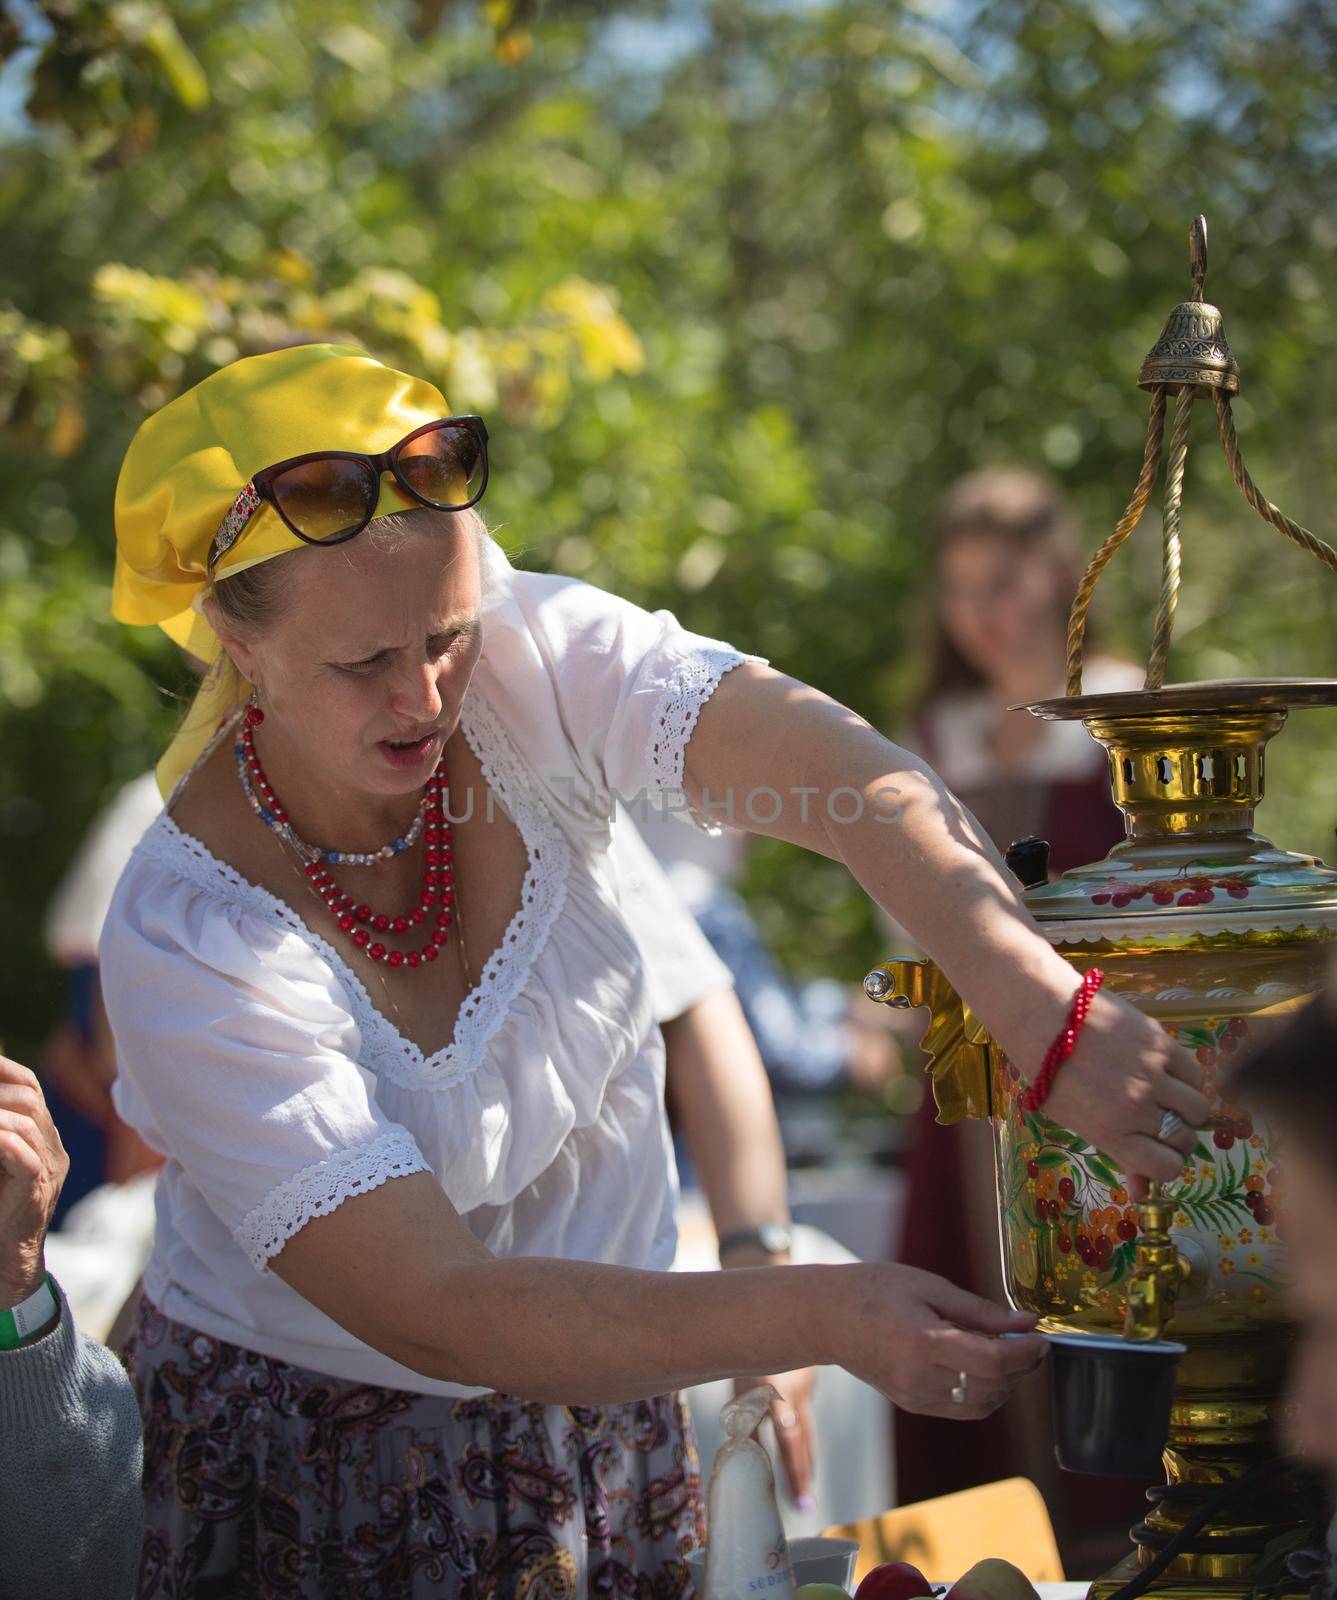 20 August 2018, Krasnovidovo, Russia - mature woman pours tea from a samovar by Studia72